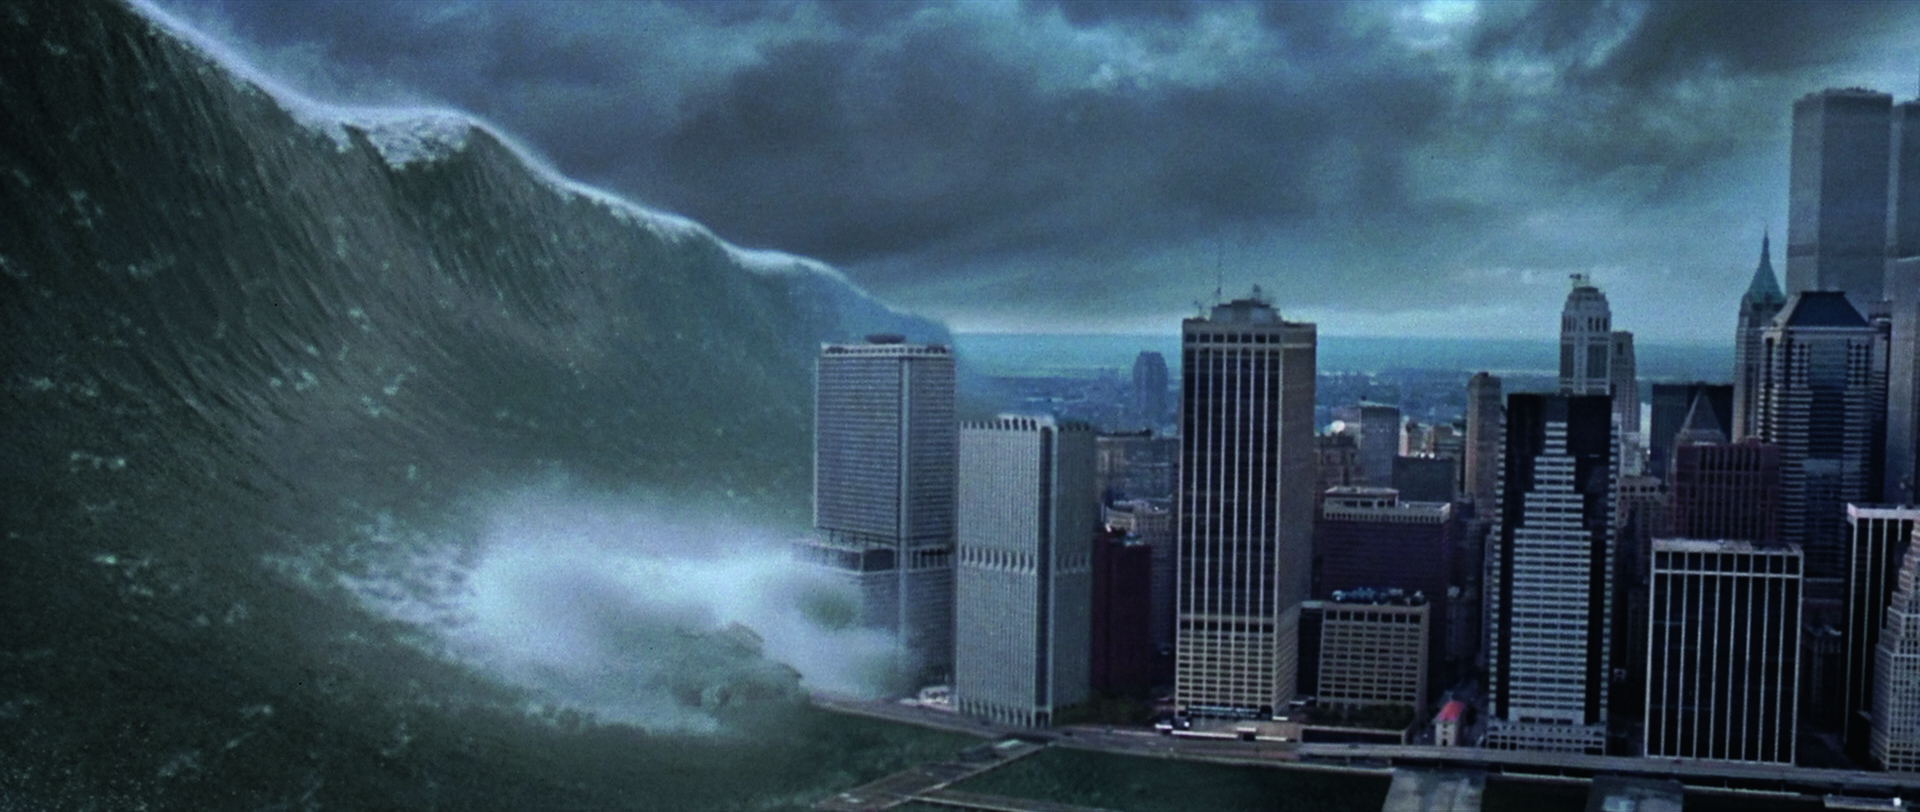 Best CGI movies of the 90s; a massive wave crashes into a city